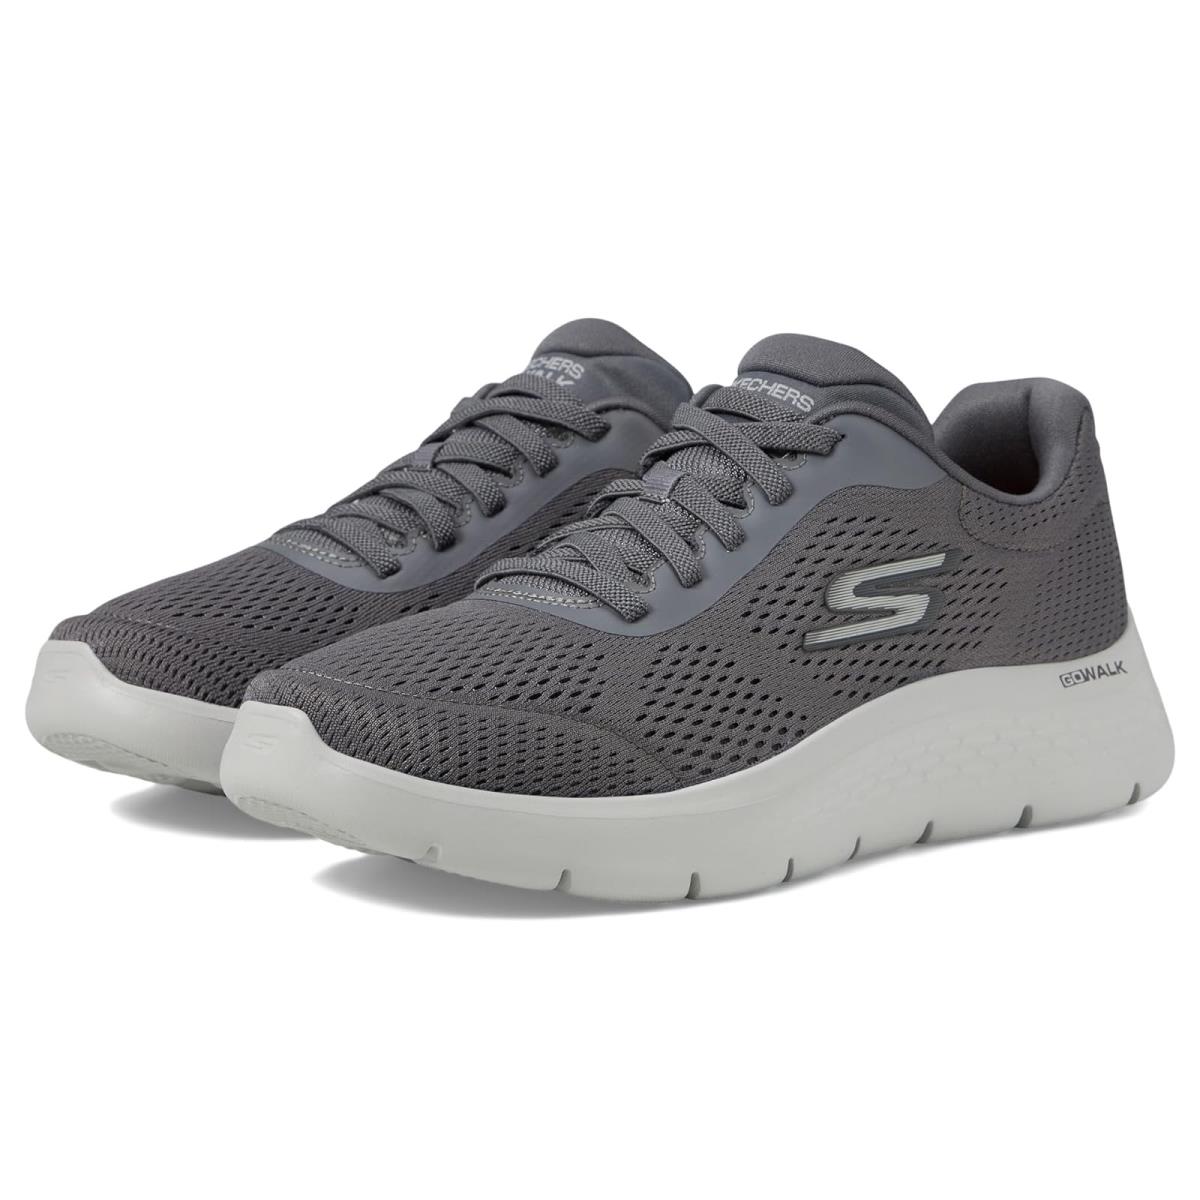 Man`s Sneakers Athletic Shoes Skechers Performance Go Walk Flex - Remark Gray/Charcoal